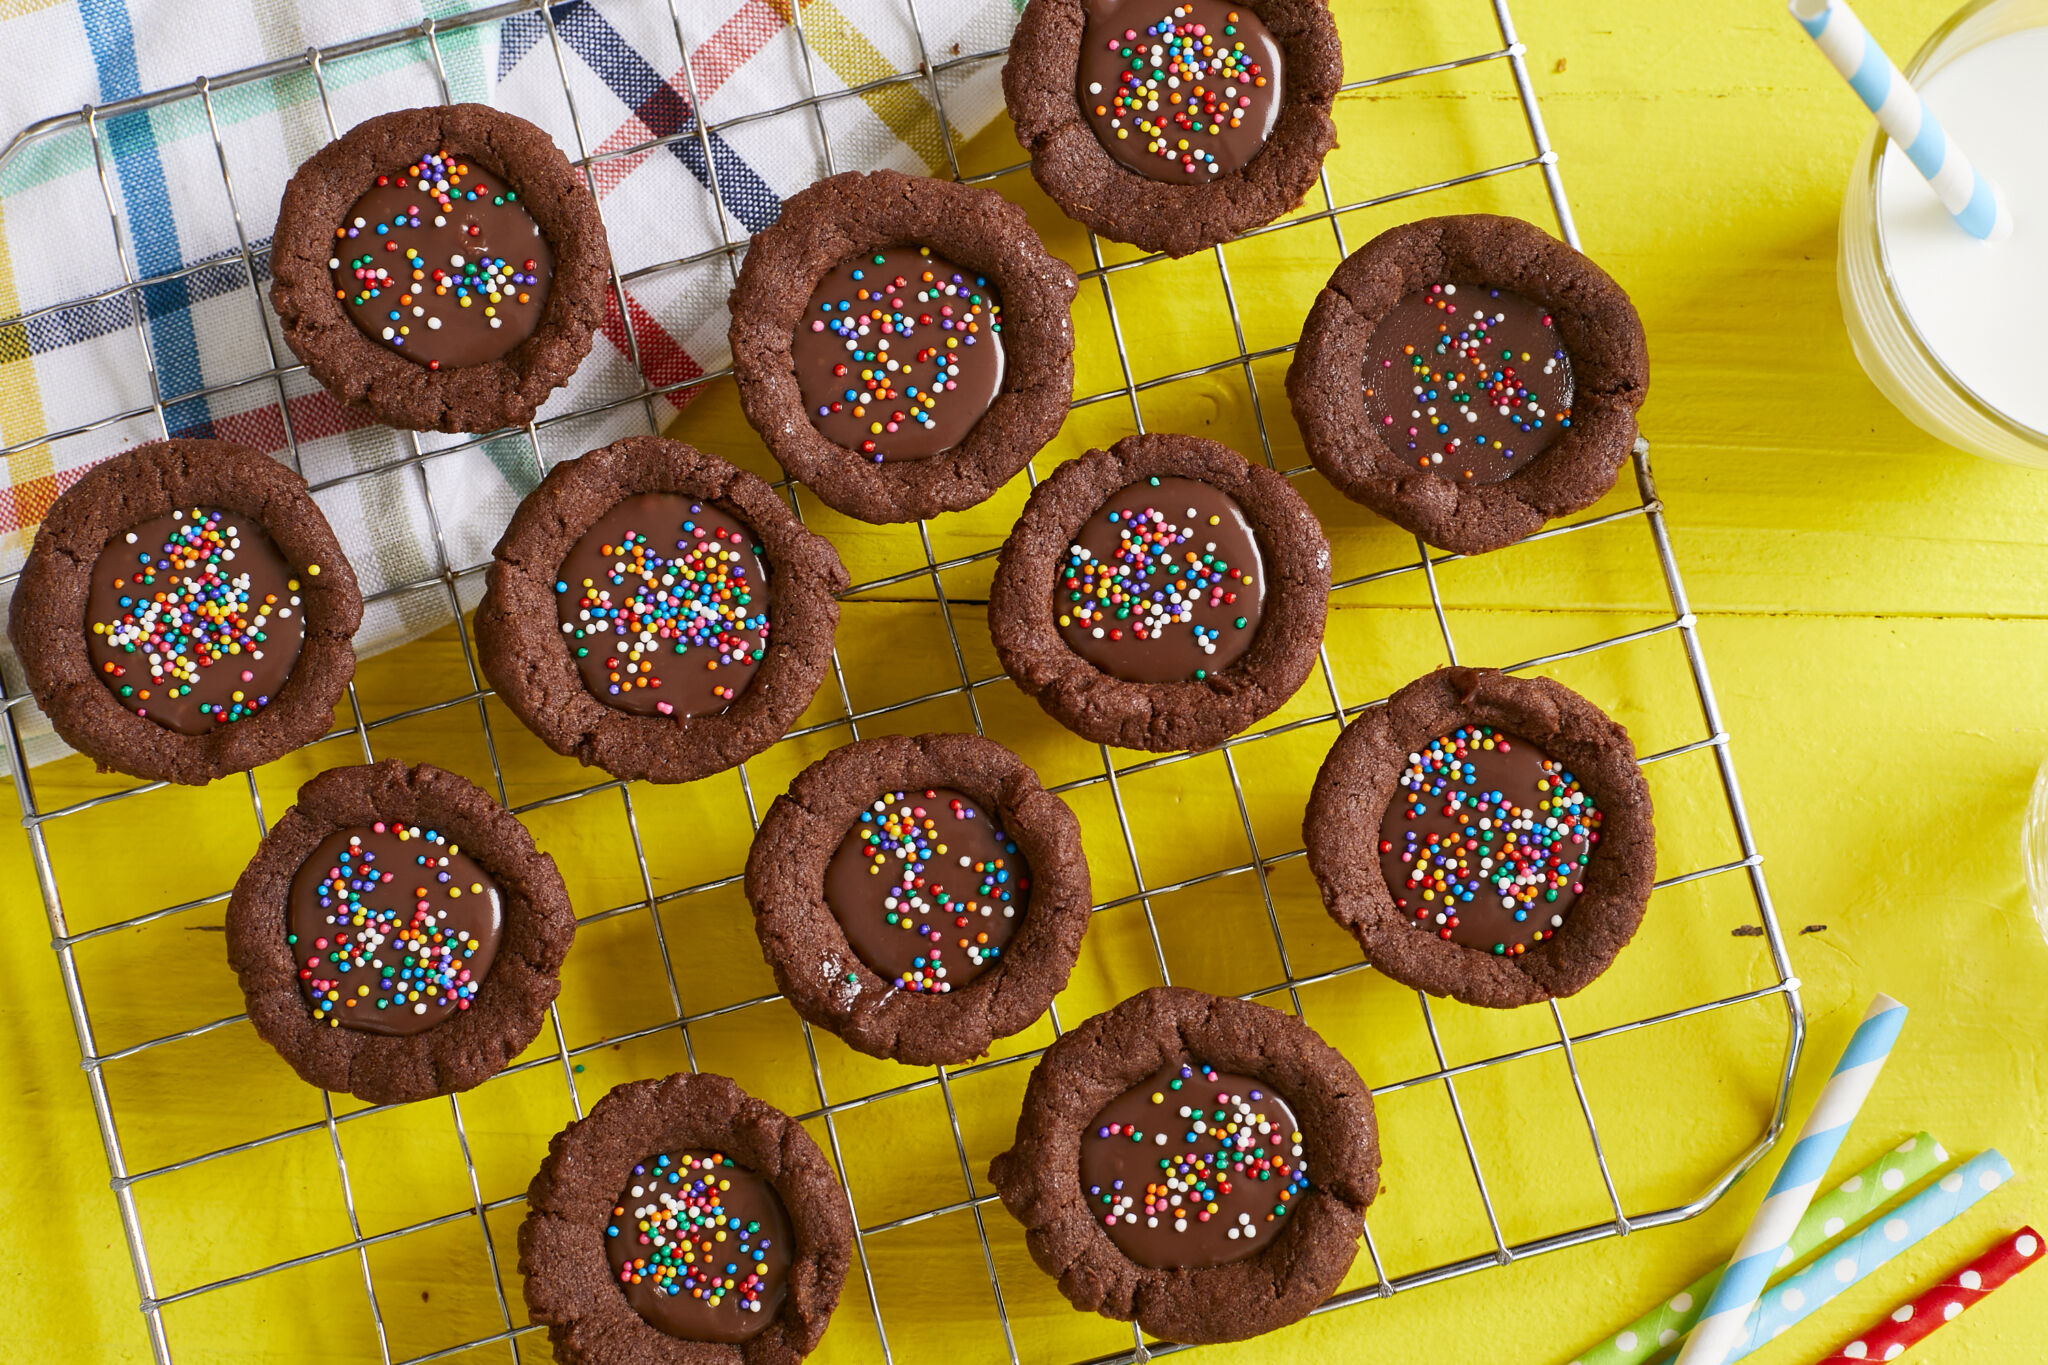 Bite-size Chocolate Cookie Cups are placed on a cooling rack. They are in signature chocolate brown color, have lightly crispy edges, soft and chewy inside with a silky ganache filling. They're decorated with colorful sprinkles. A glass cup of milk is served on the side.